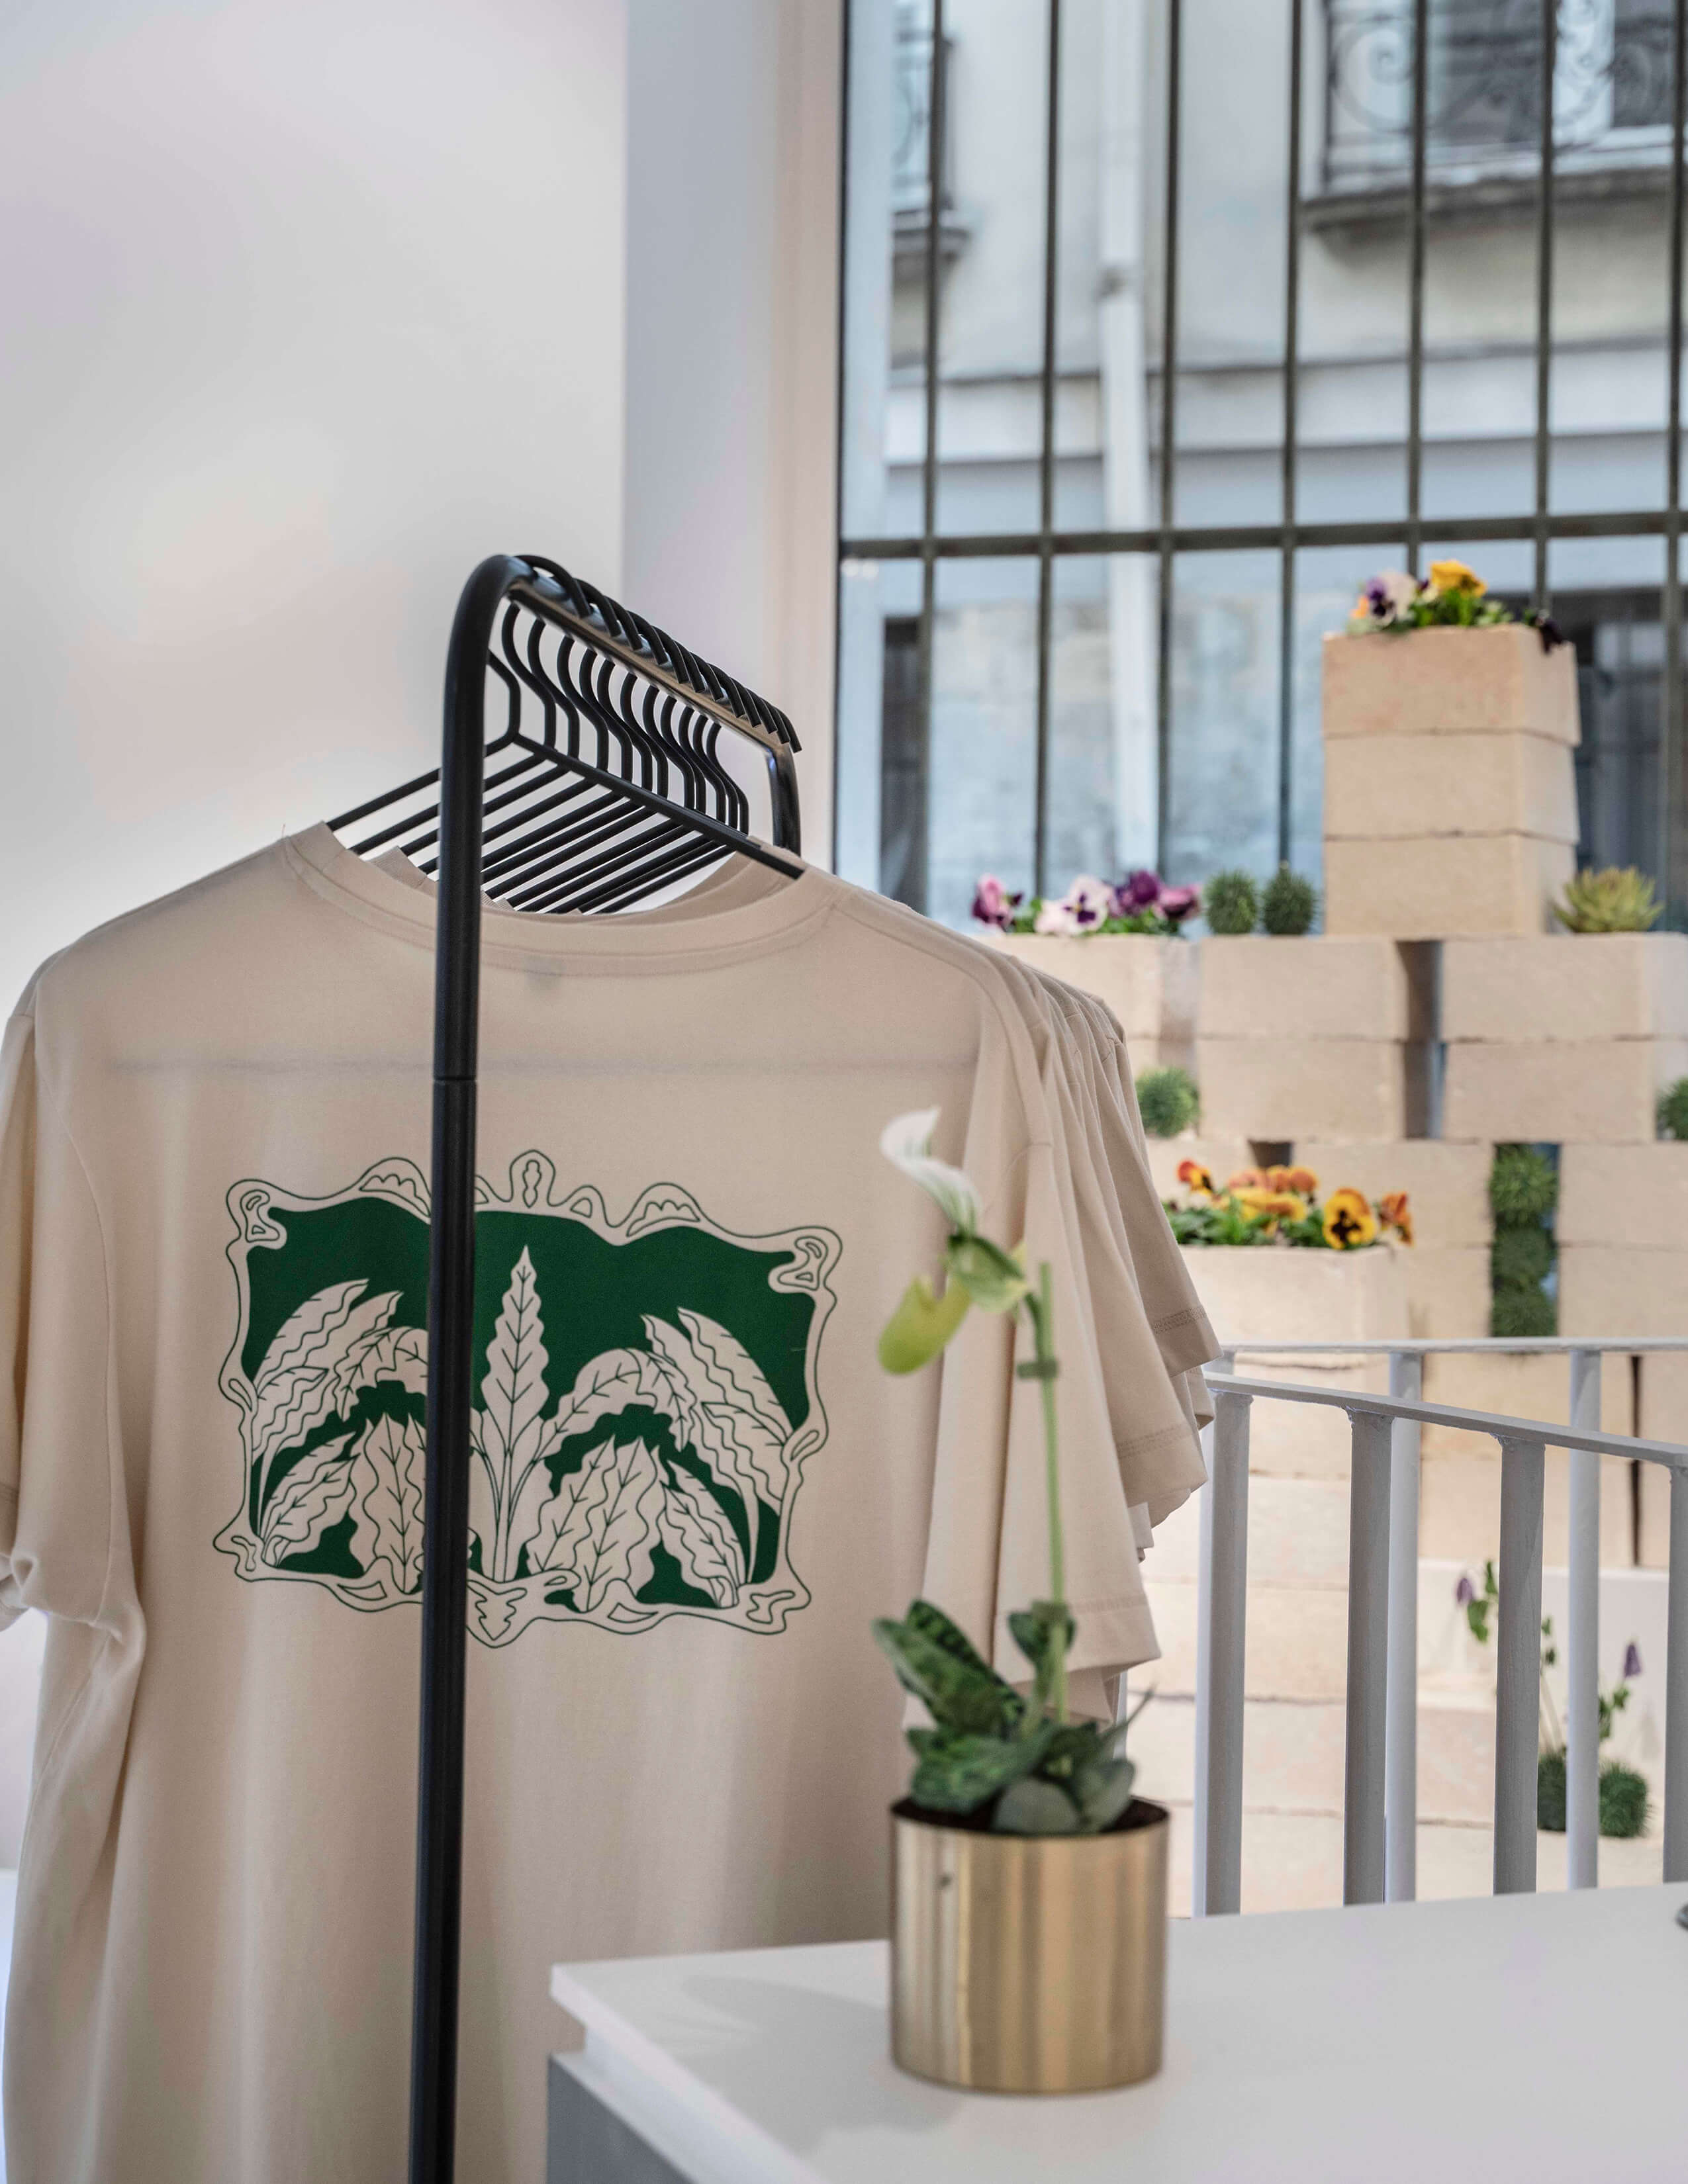 Sowvital merchandise - T-shirts are hung up on the clothing rack and there is a small pot of plant next to it.